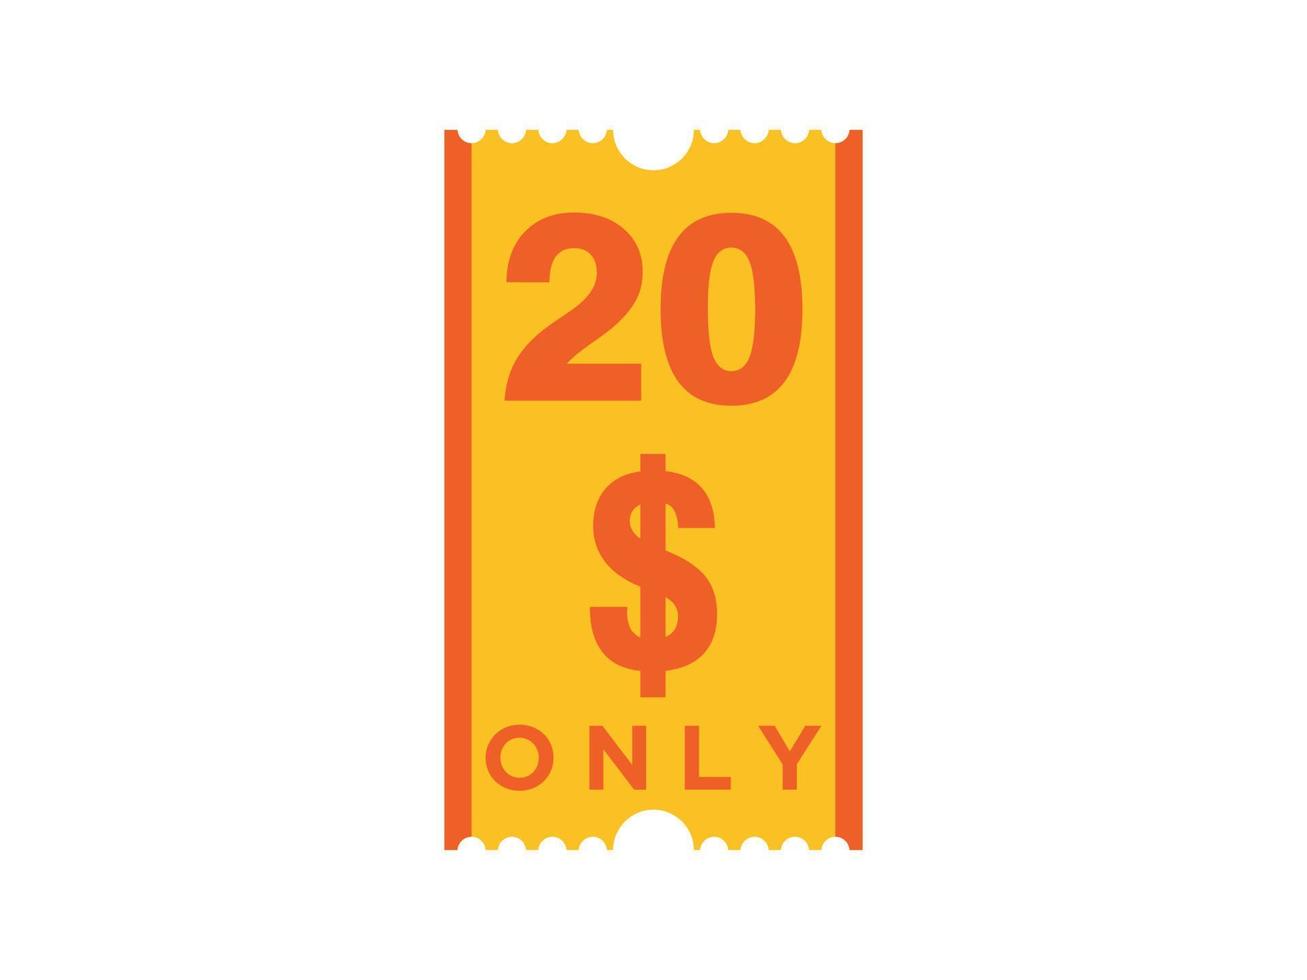 20 Dollar Only Coupon sign or Label or discount voucher Money Saving label, with coupon vector illustration summer offer ends weekend holiday